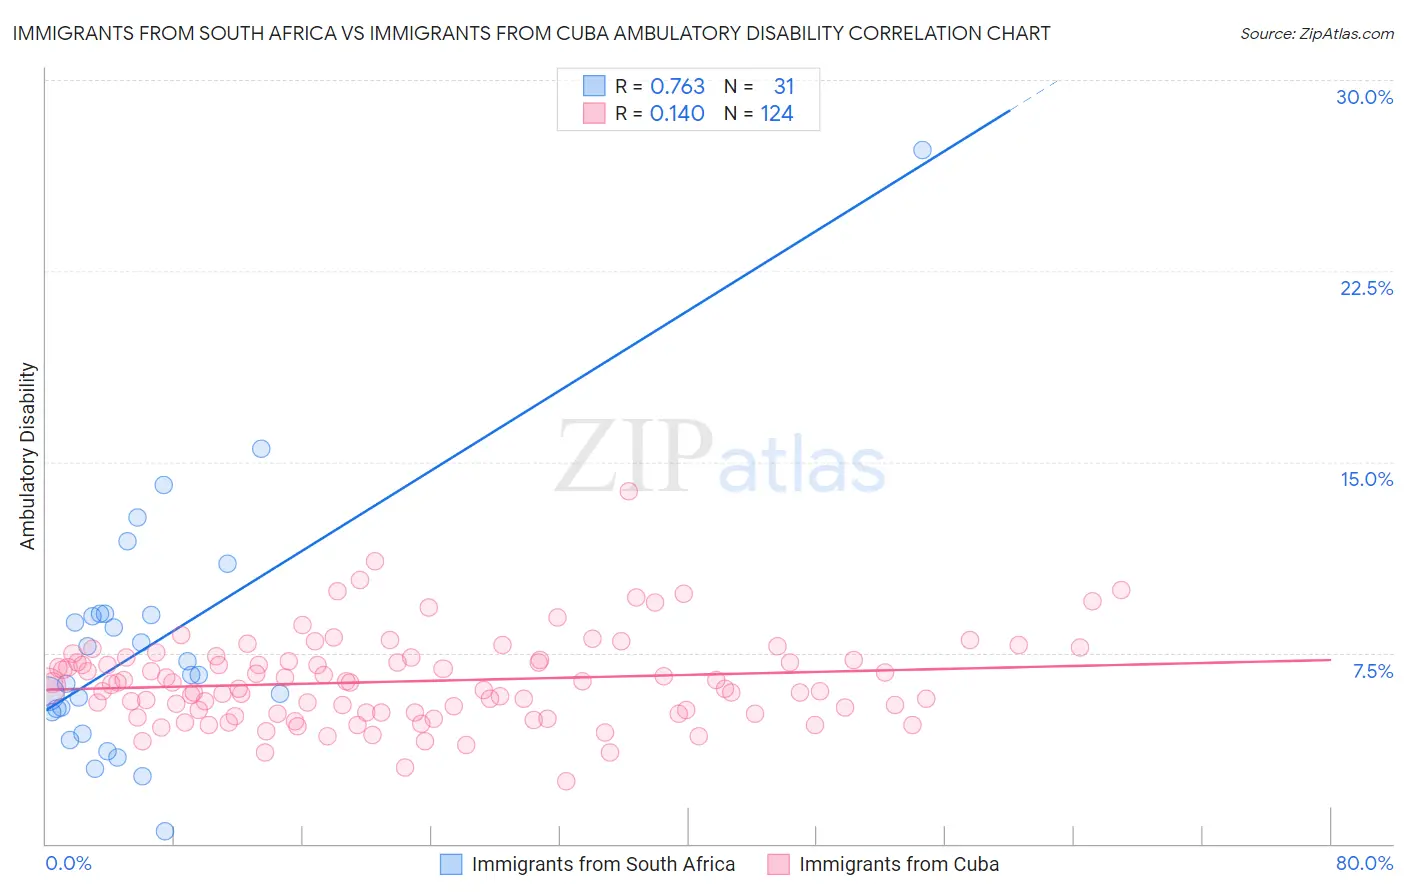 Immigrants from South Africa vs Immigrants from Cuba Ambulatory Disability